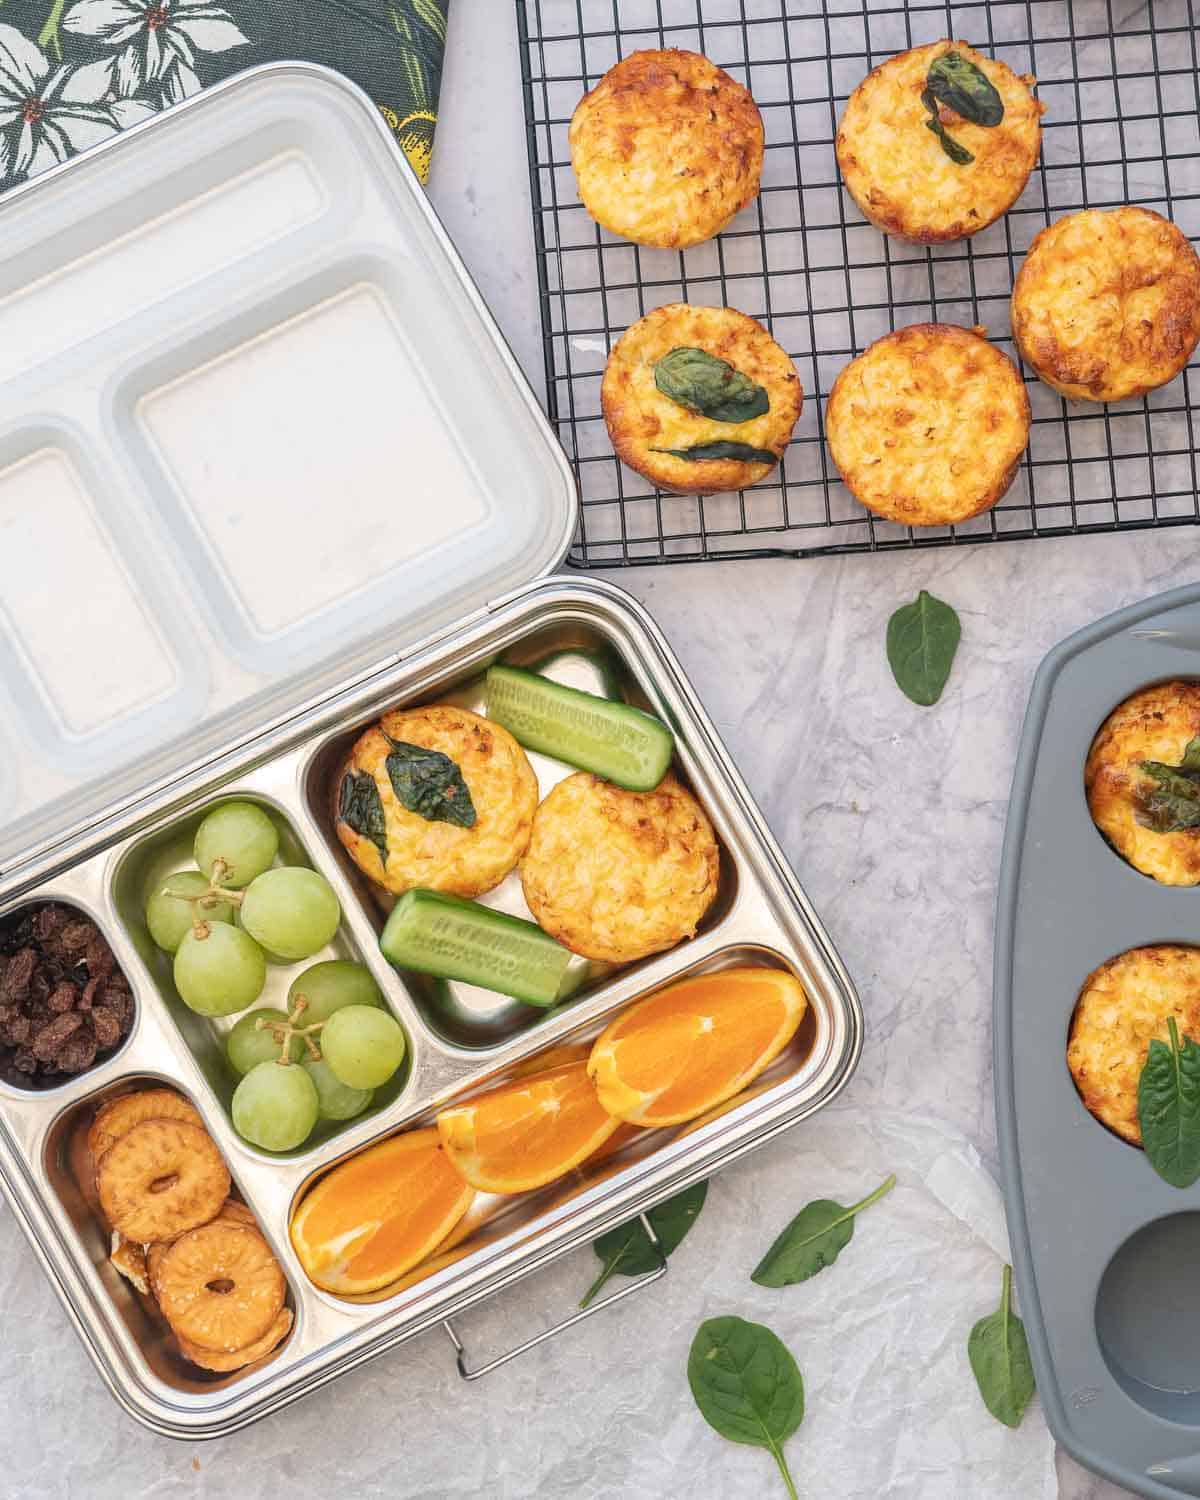 A tin lunch box filled with snack food and breakfast egg muffins sitting on a bench next to a tray and cooling rack of egg muffins 